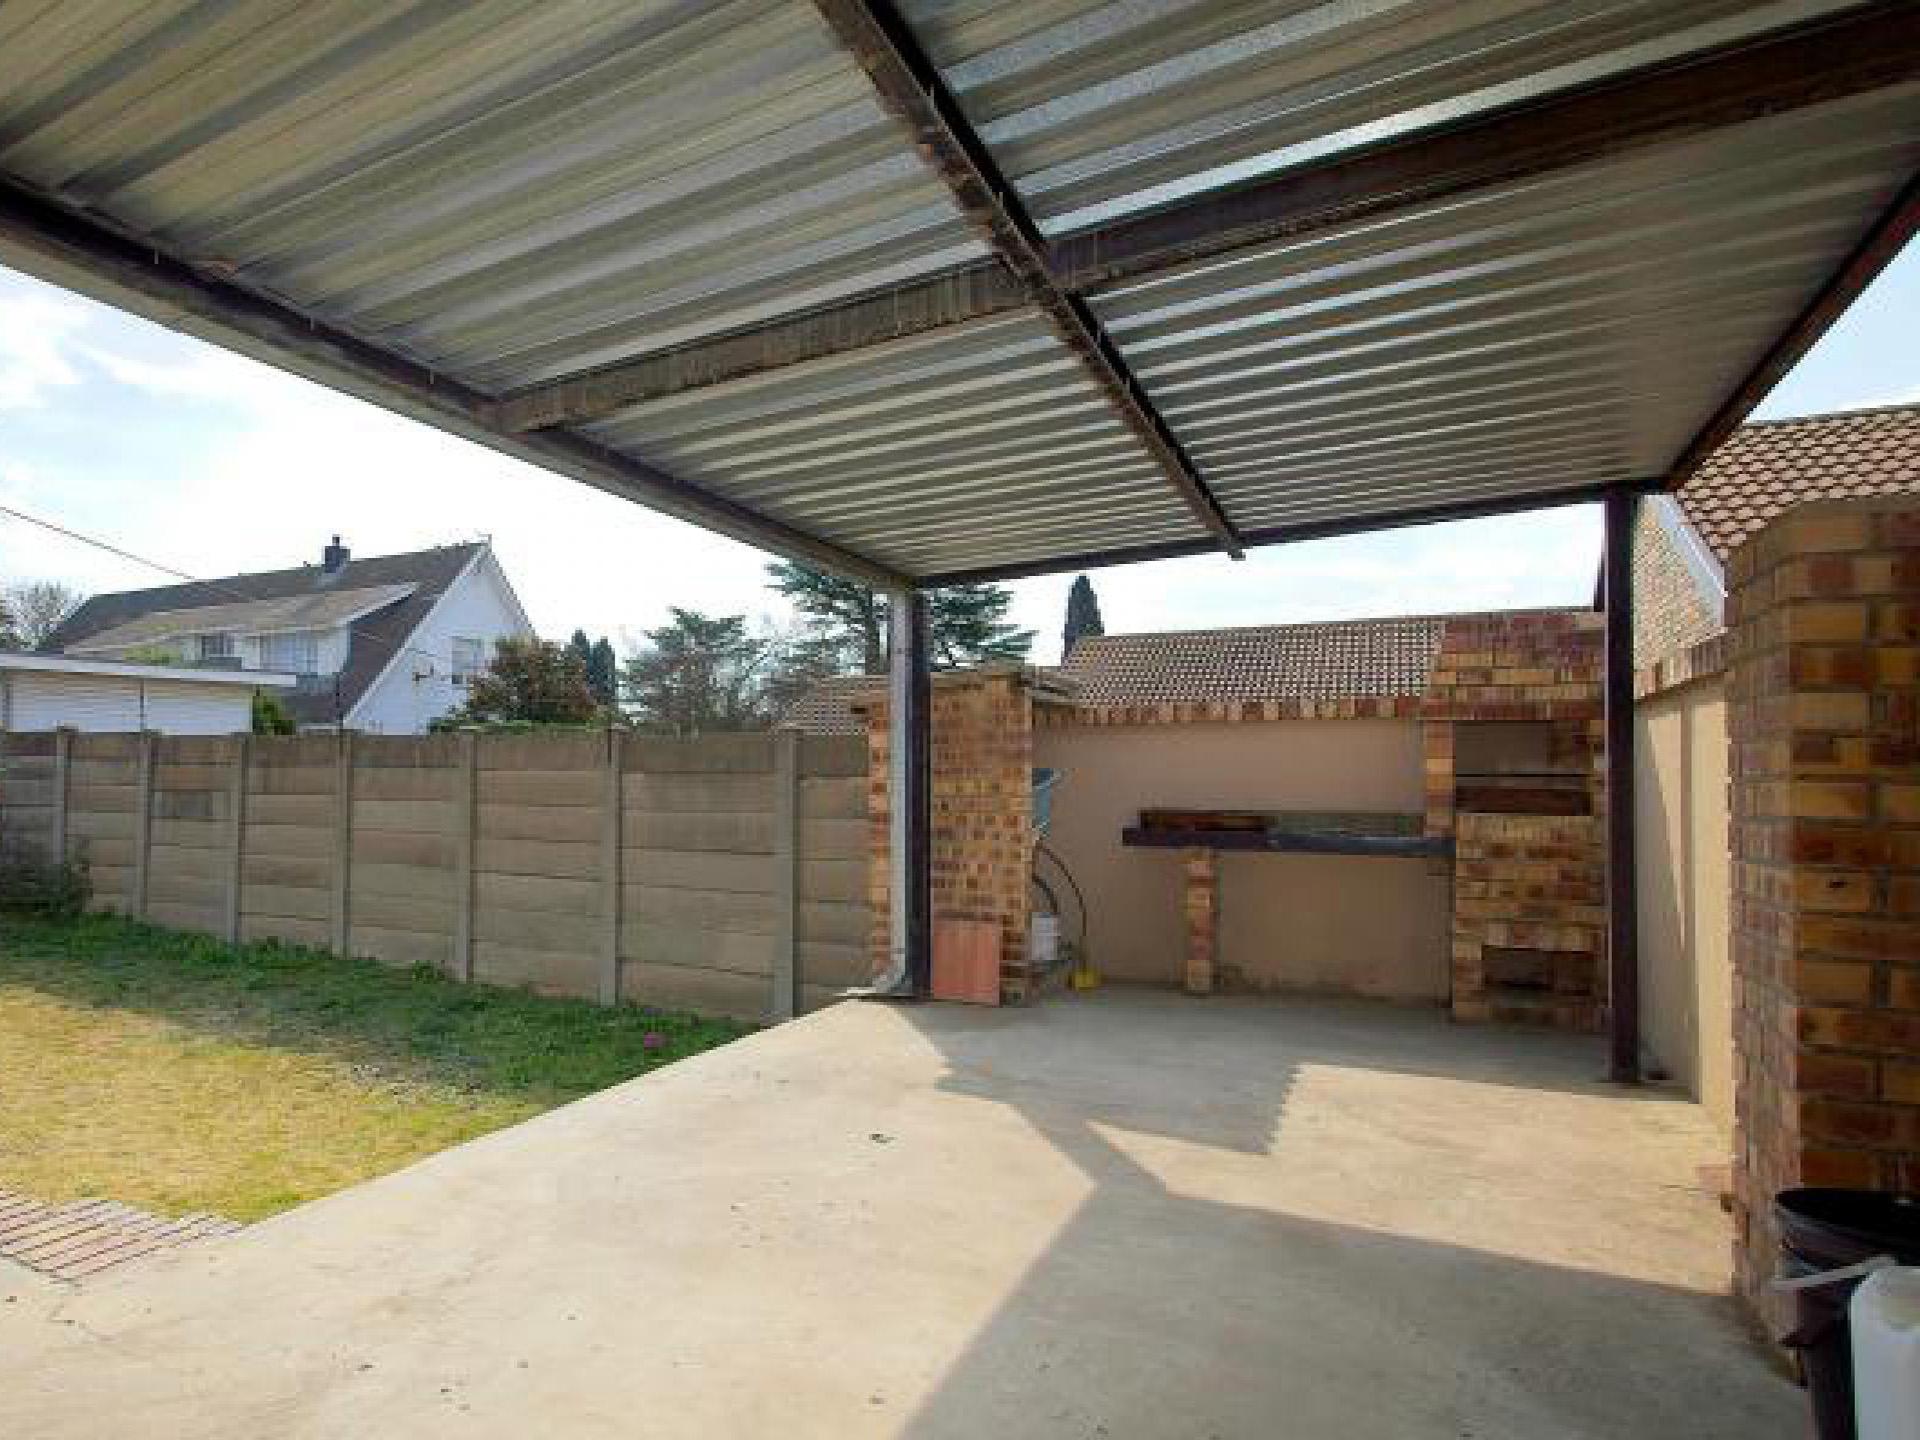 Patio of property in Ermelo